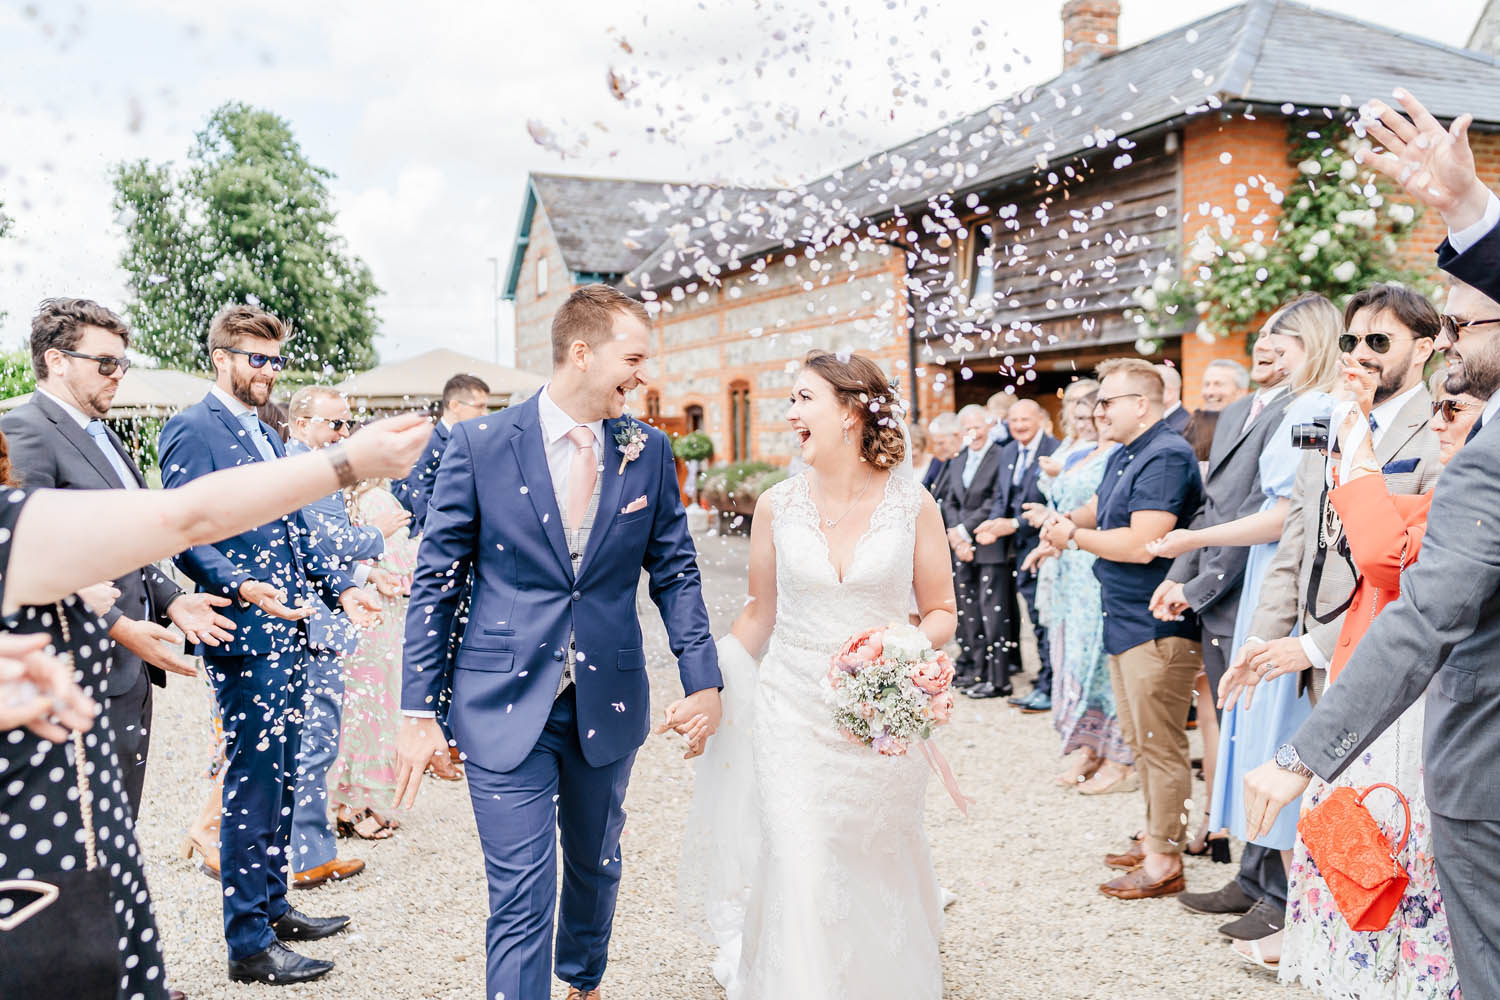 Bride and groom turn to each other and laugh as guests throw confetti on their wedding day. By Rebecca Casey Photography at The Manor Estate